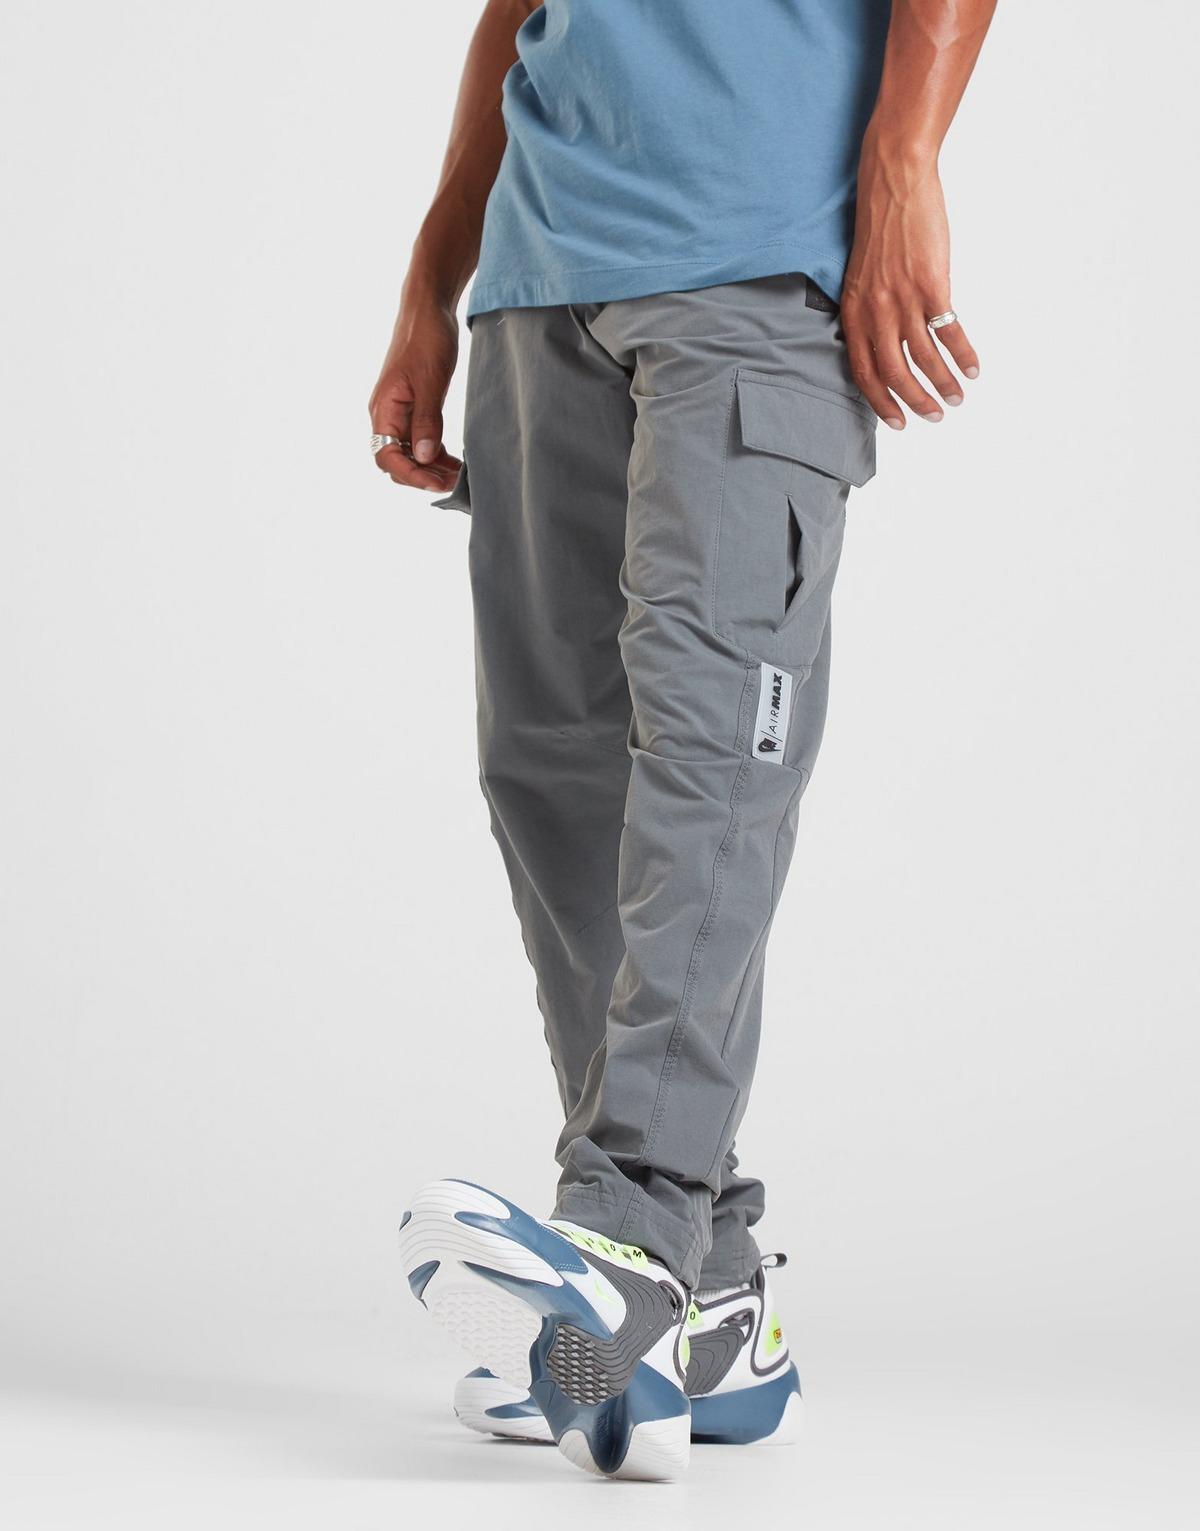 Air Max Woven Cargo Pants in Iron Grey 